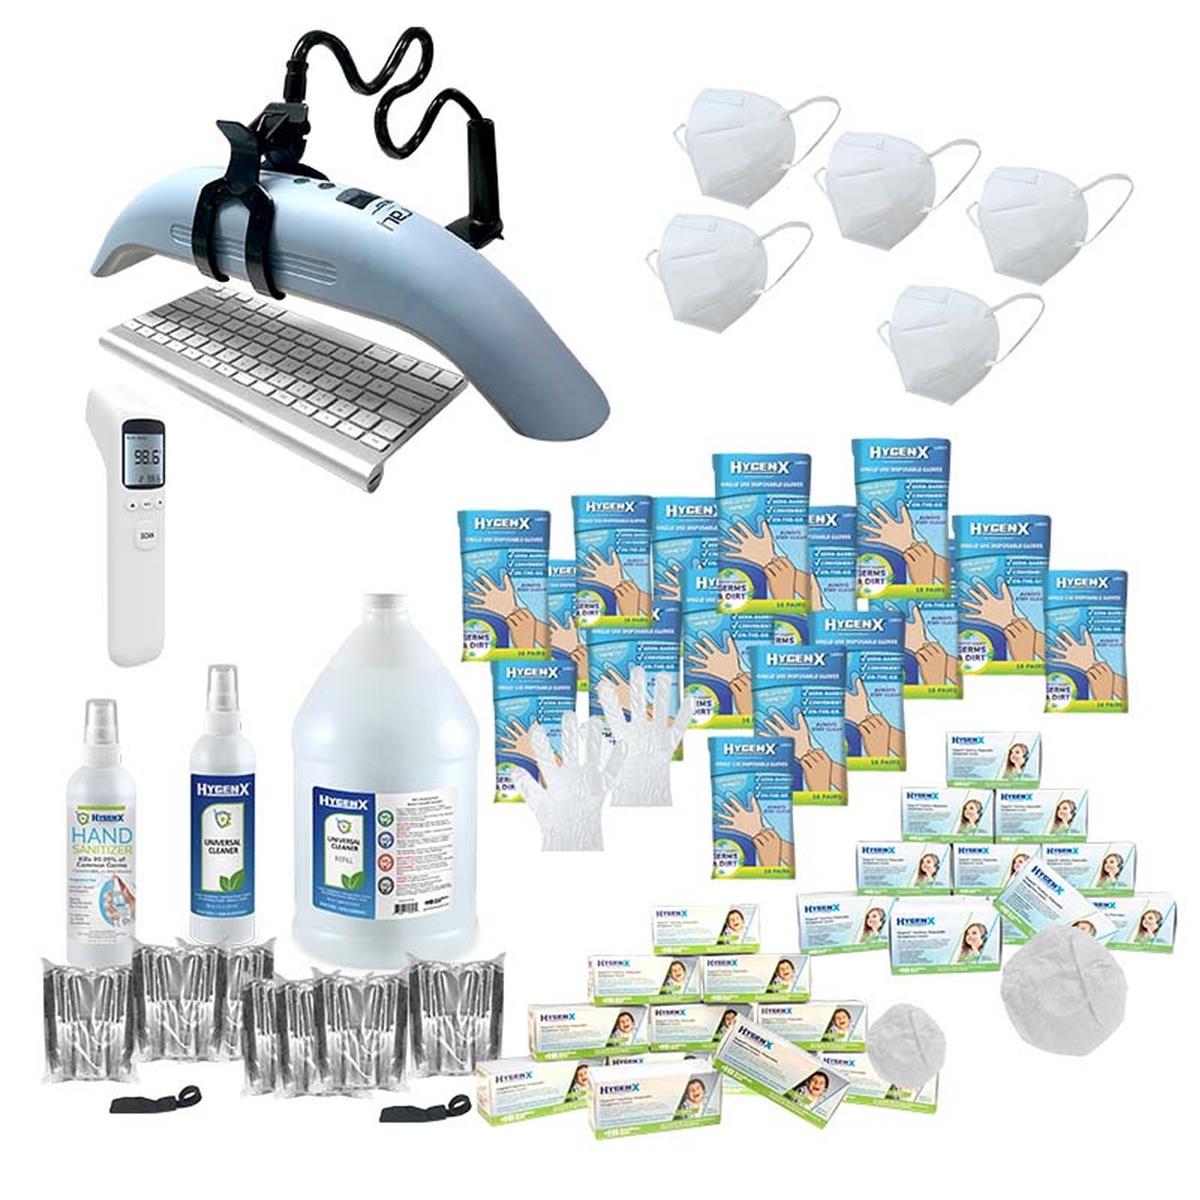 Image of Hamilton Buhl HygenX Clean and Healthy Deluxe Kit